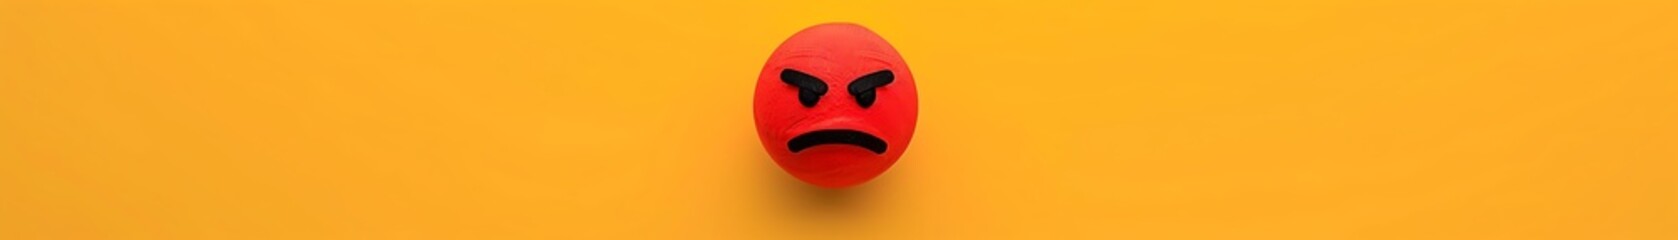 angry emoji on a lemon yellow background with space for text The emoji is bright red with a frowning face